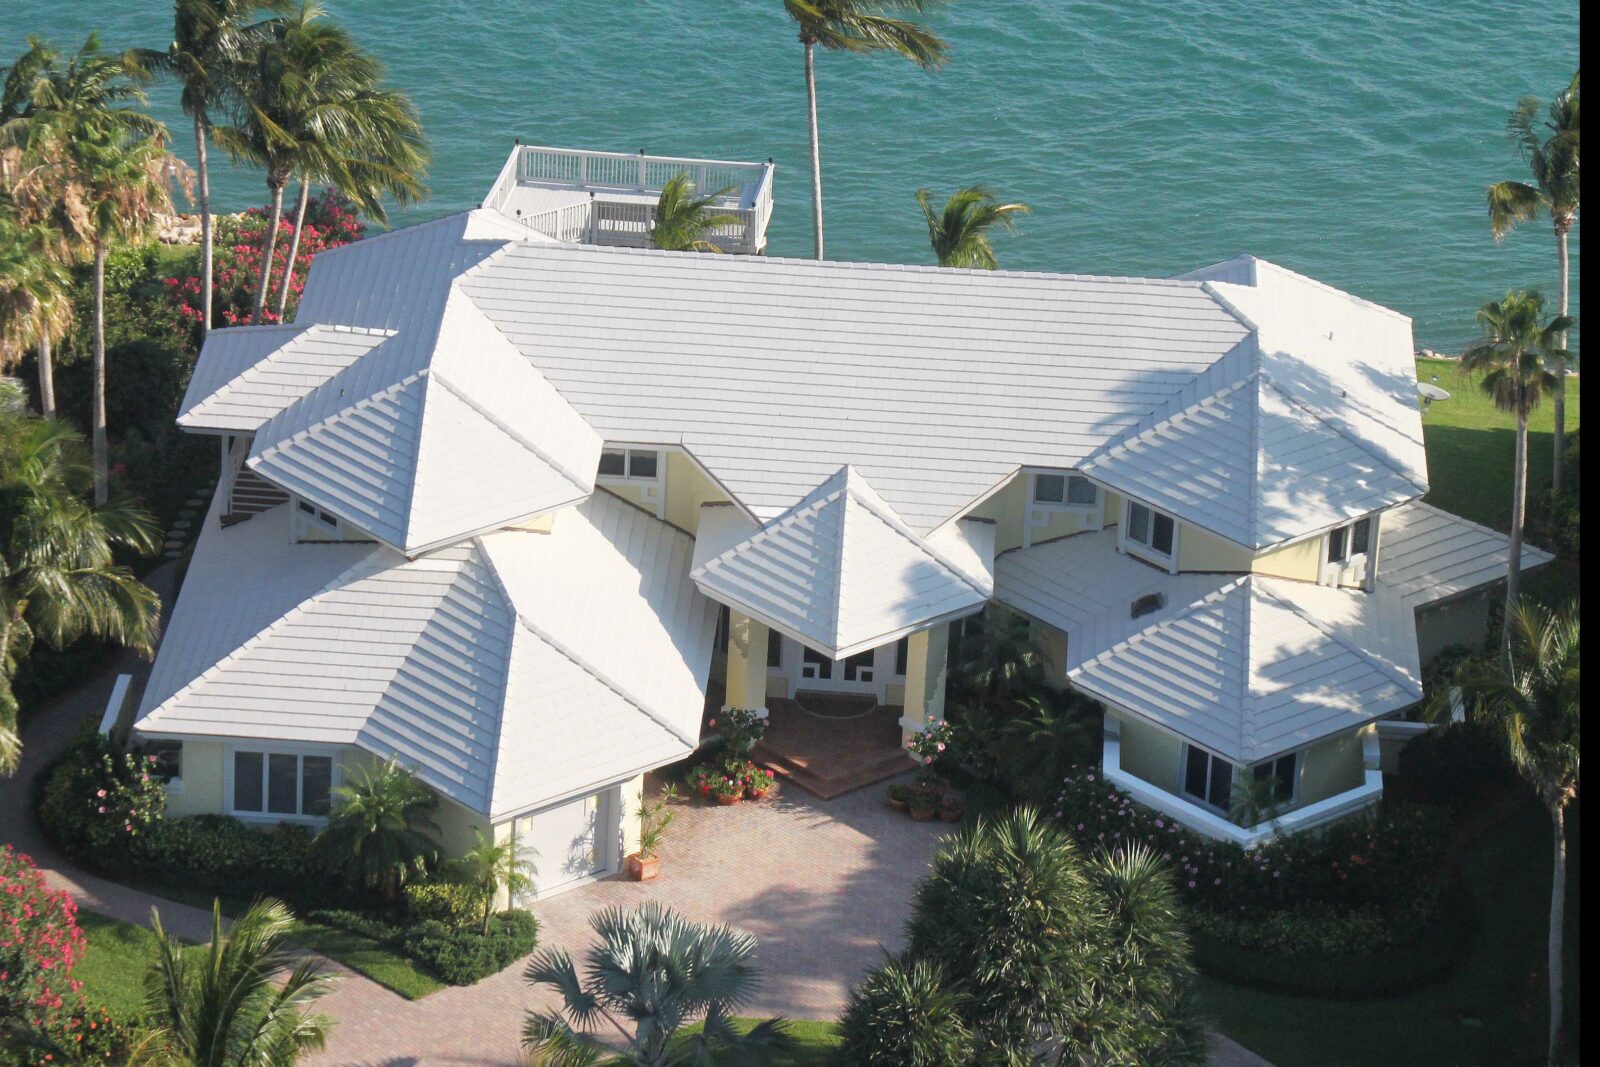 About Miami Roofing